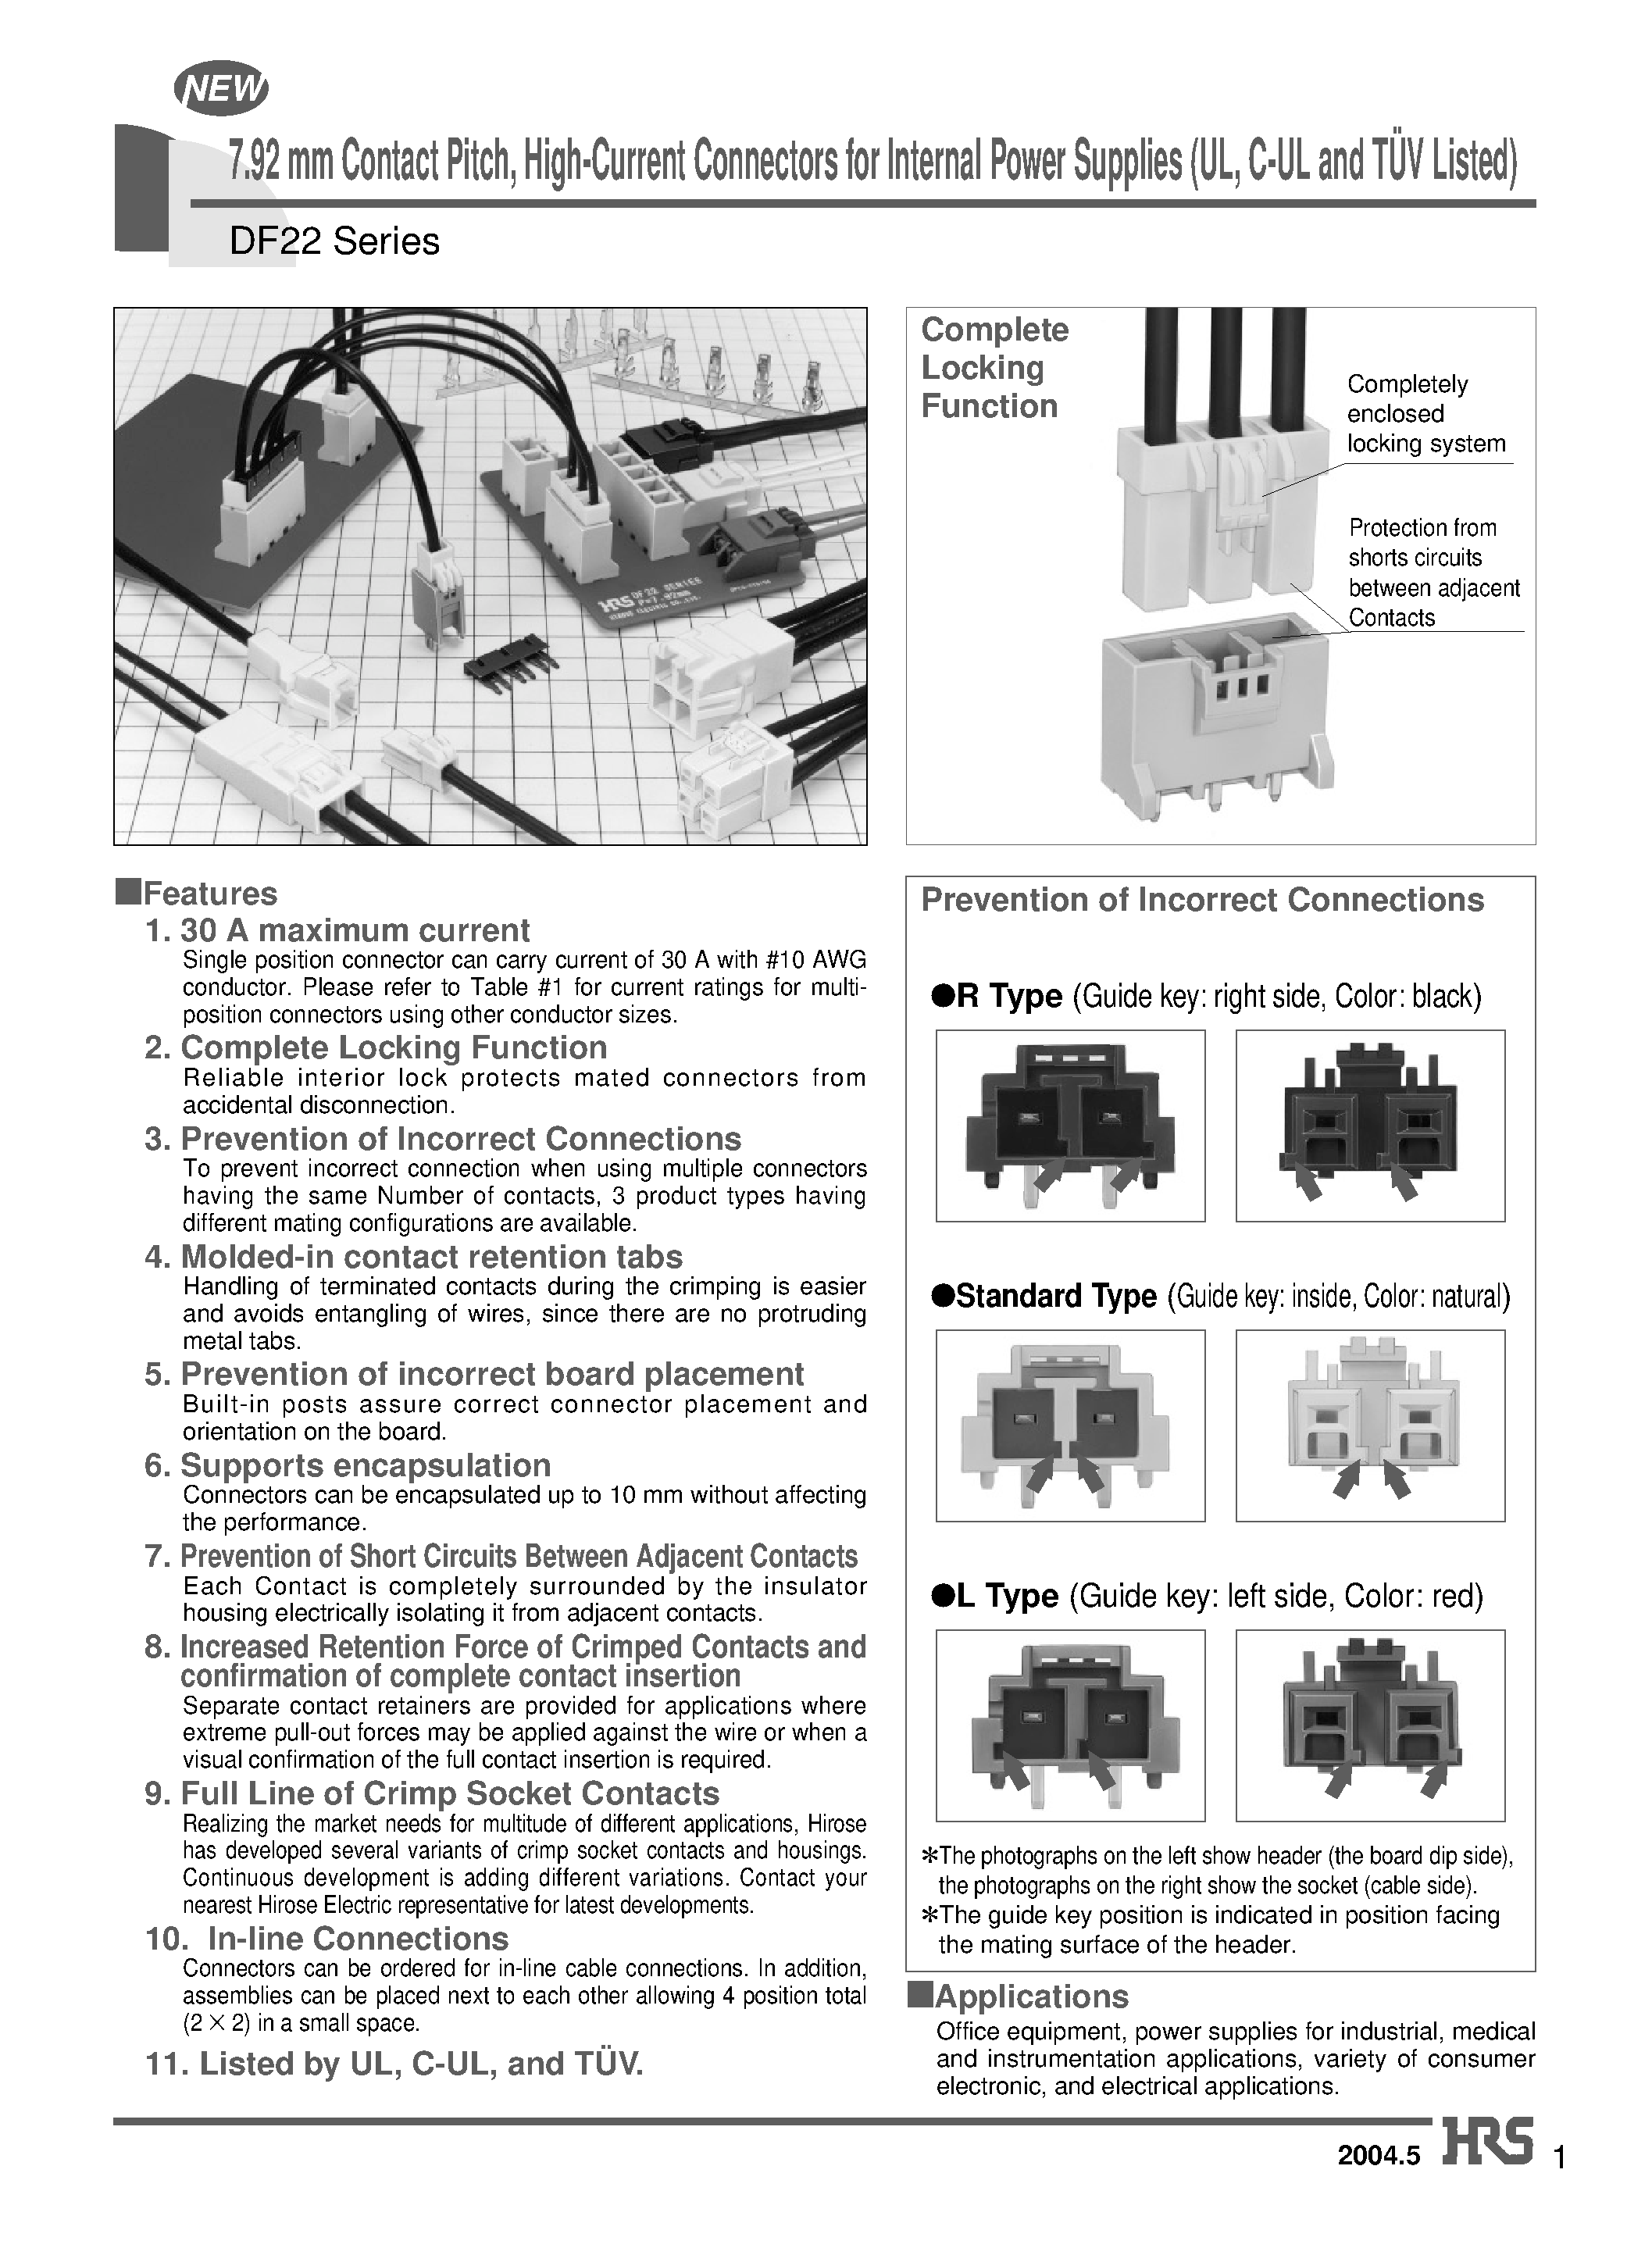 Даташит DF22BR-1P-7.92DSA - 7.92 mm Contact Pitch/ High-Current Connectors for Internal Power Supplies (UL/ C-UL and TUV Listed) страница 1